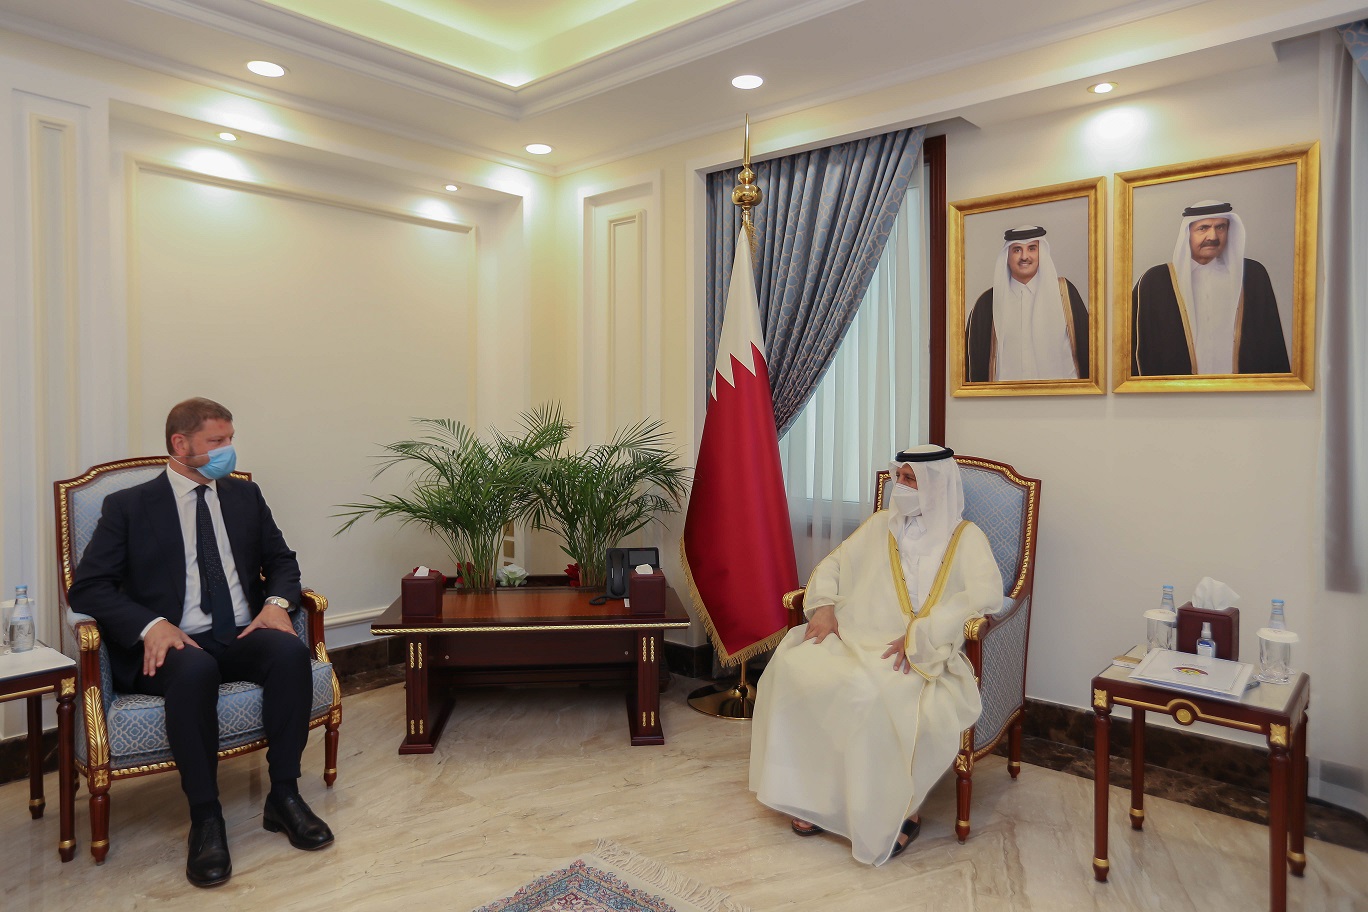 Speaker of Shura Council Meets Chairperson of Parliamentary Assembly of the Mediterranean